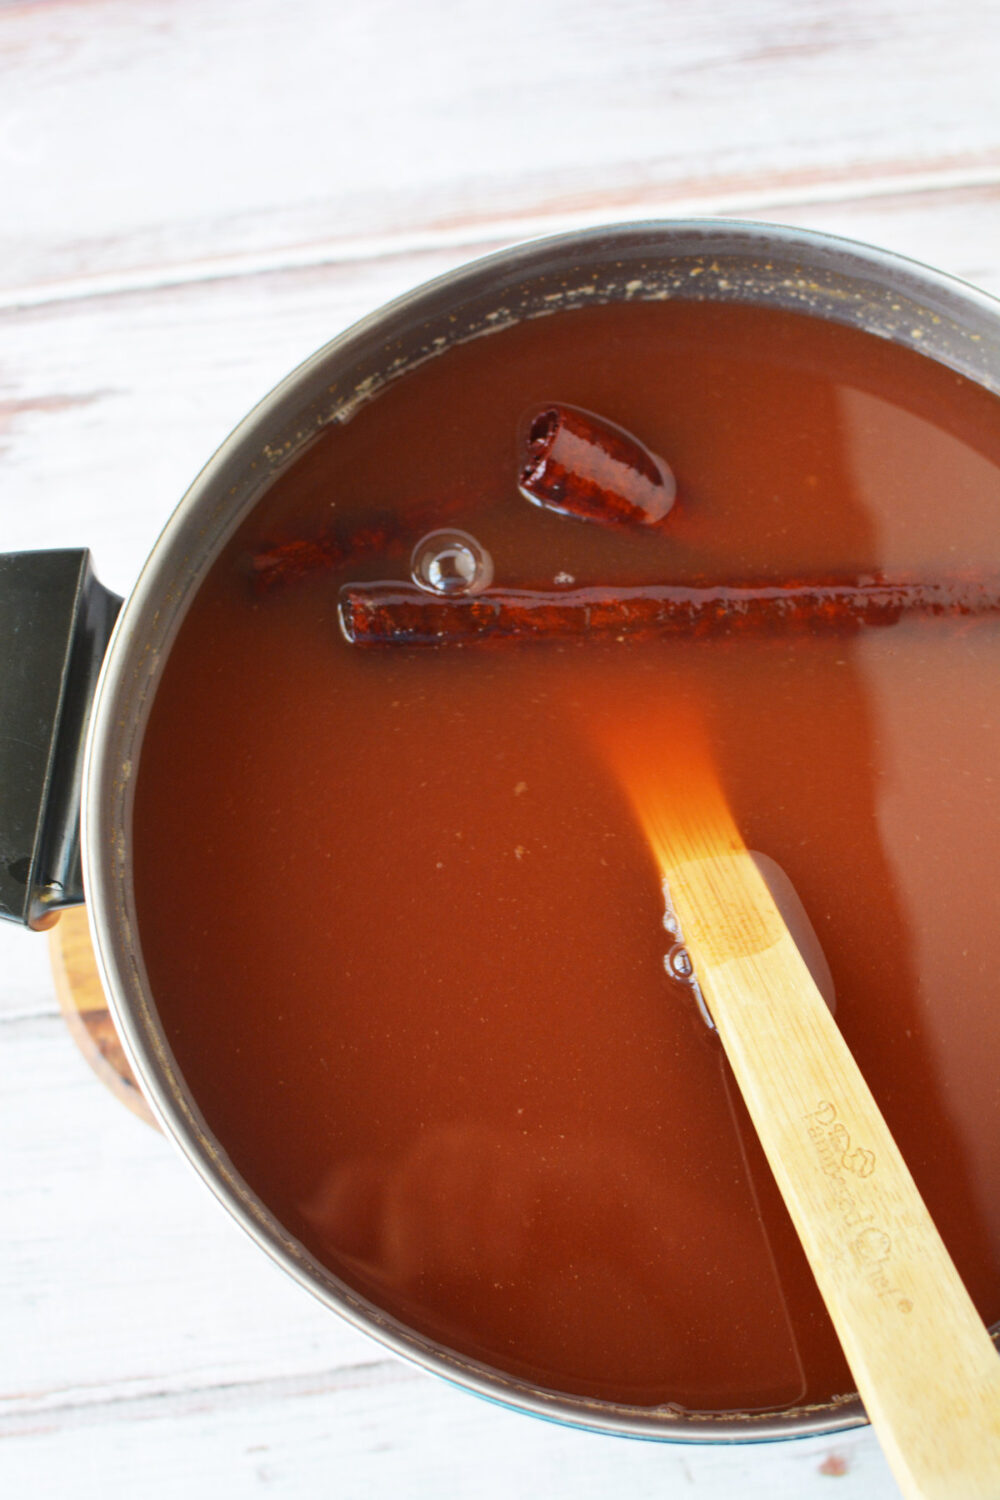 Punch with cinnamon sticks in it. 